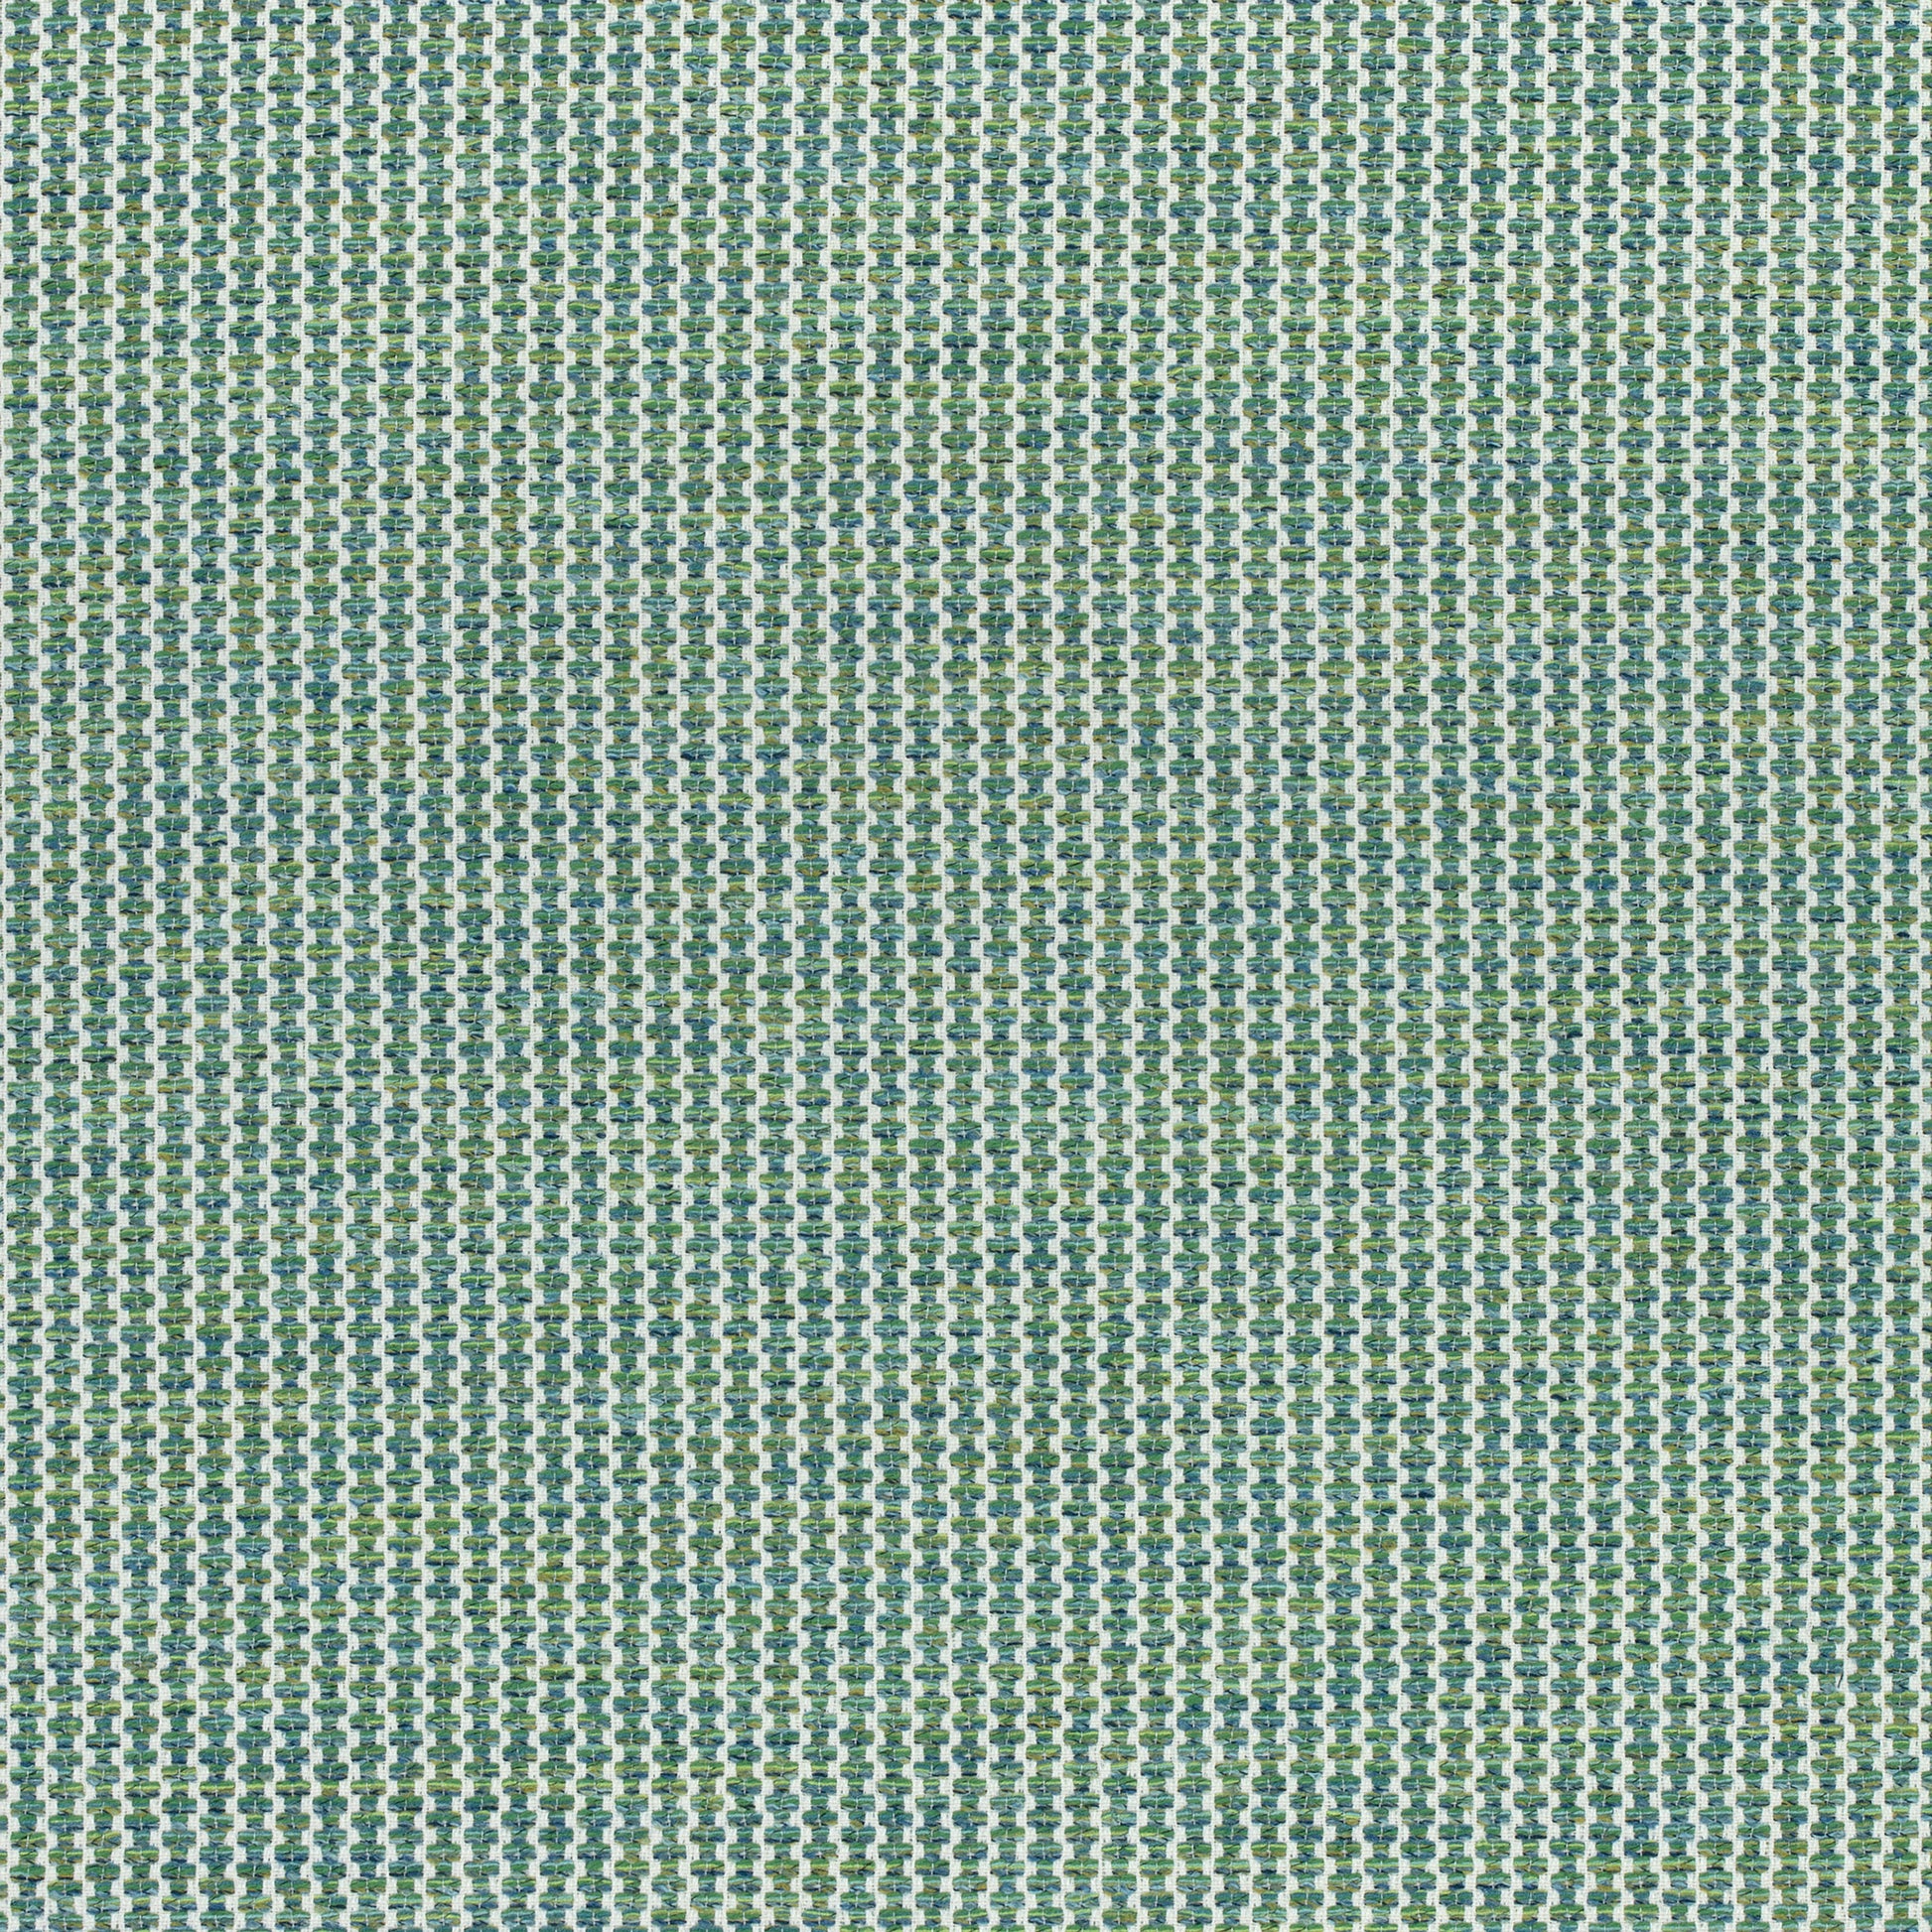 Purchase Thibaut Fabric Pattern number W74086 pattern name Ryder color Green